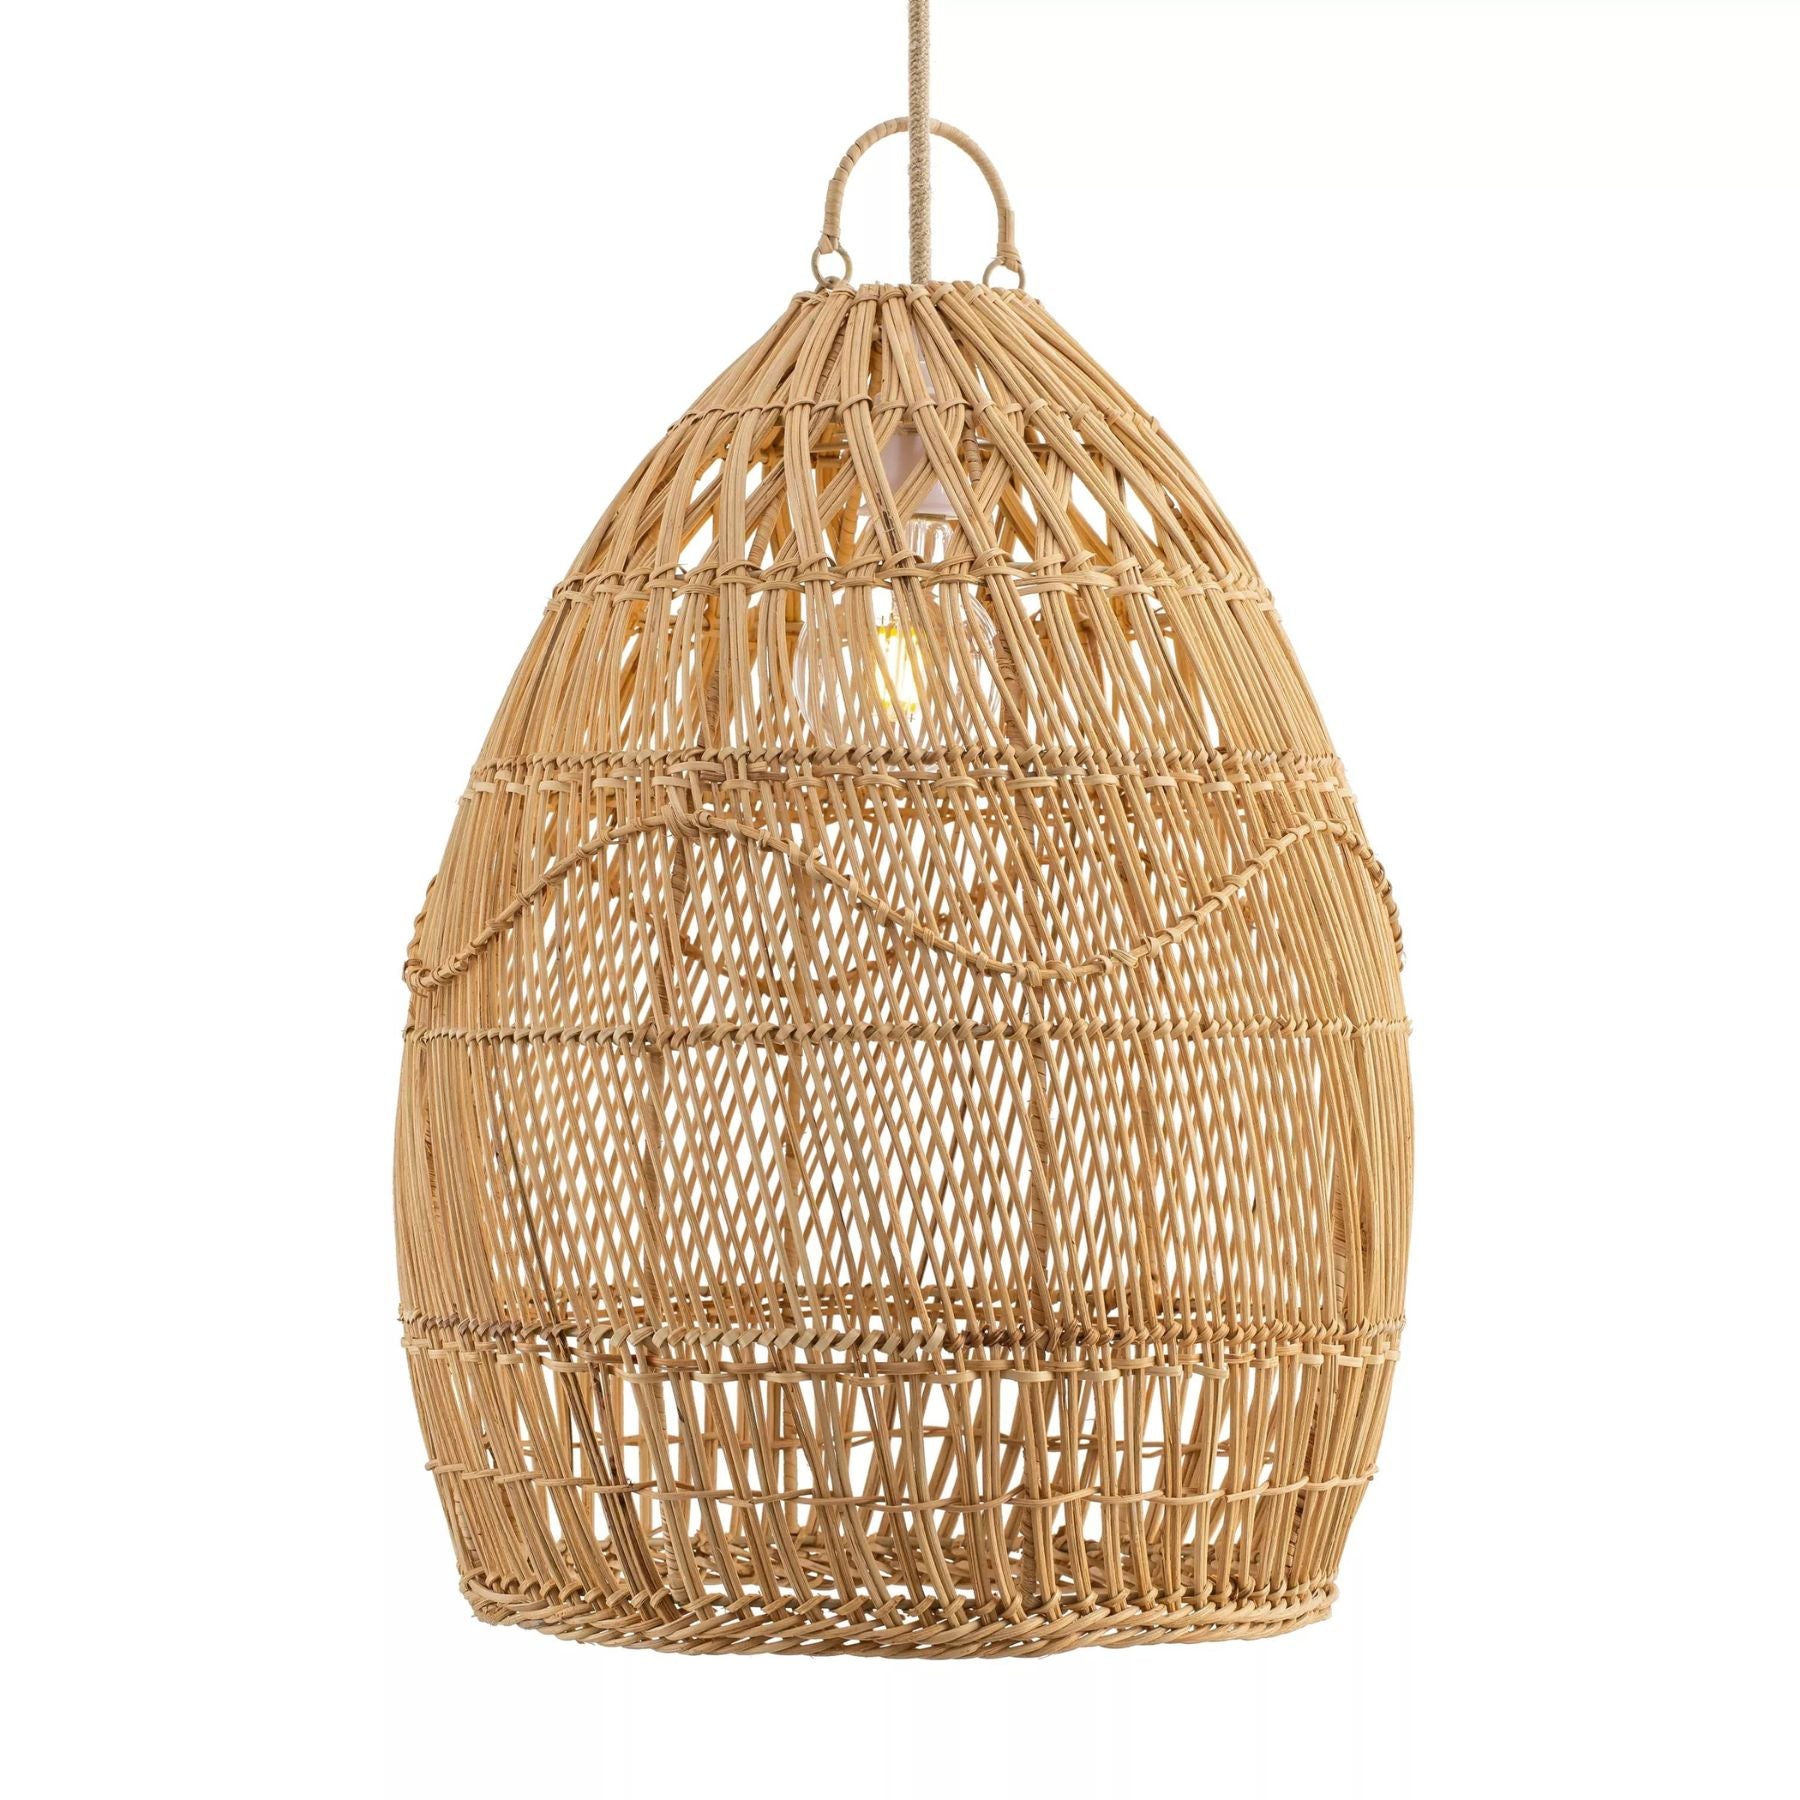 perio rattan pendant lights are famous for their organic and stylish design that enhances any space leaving a lasting impression